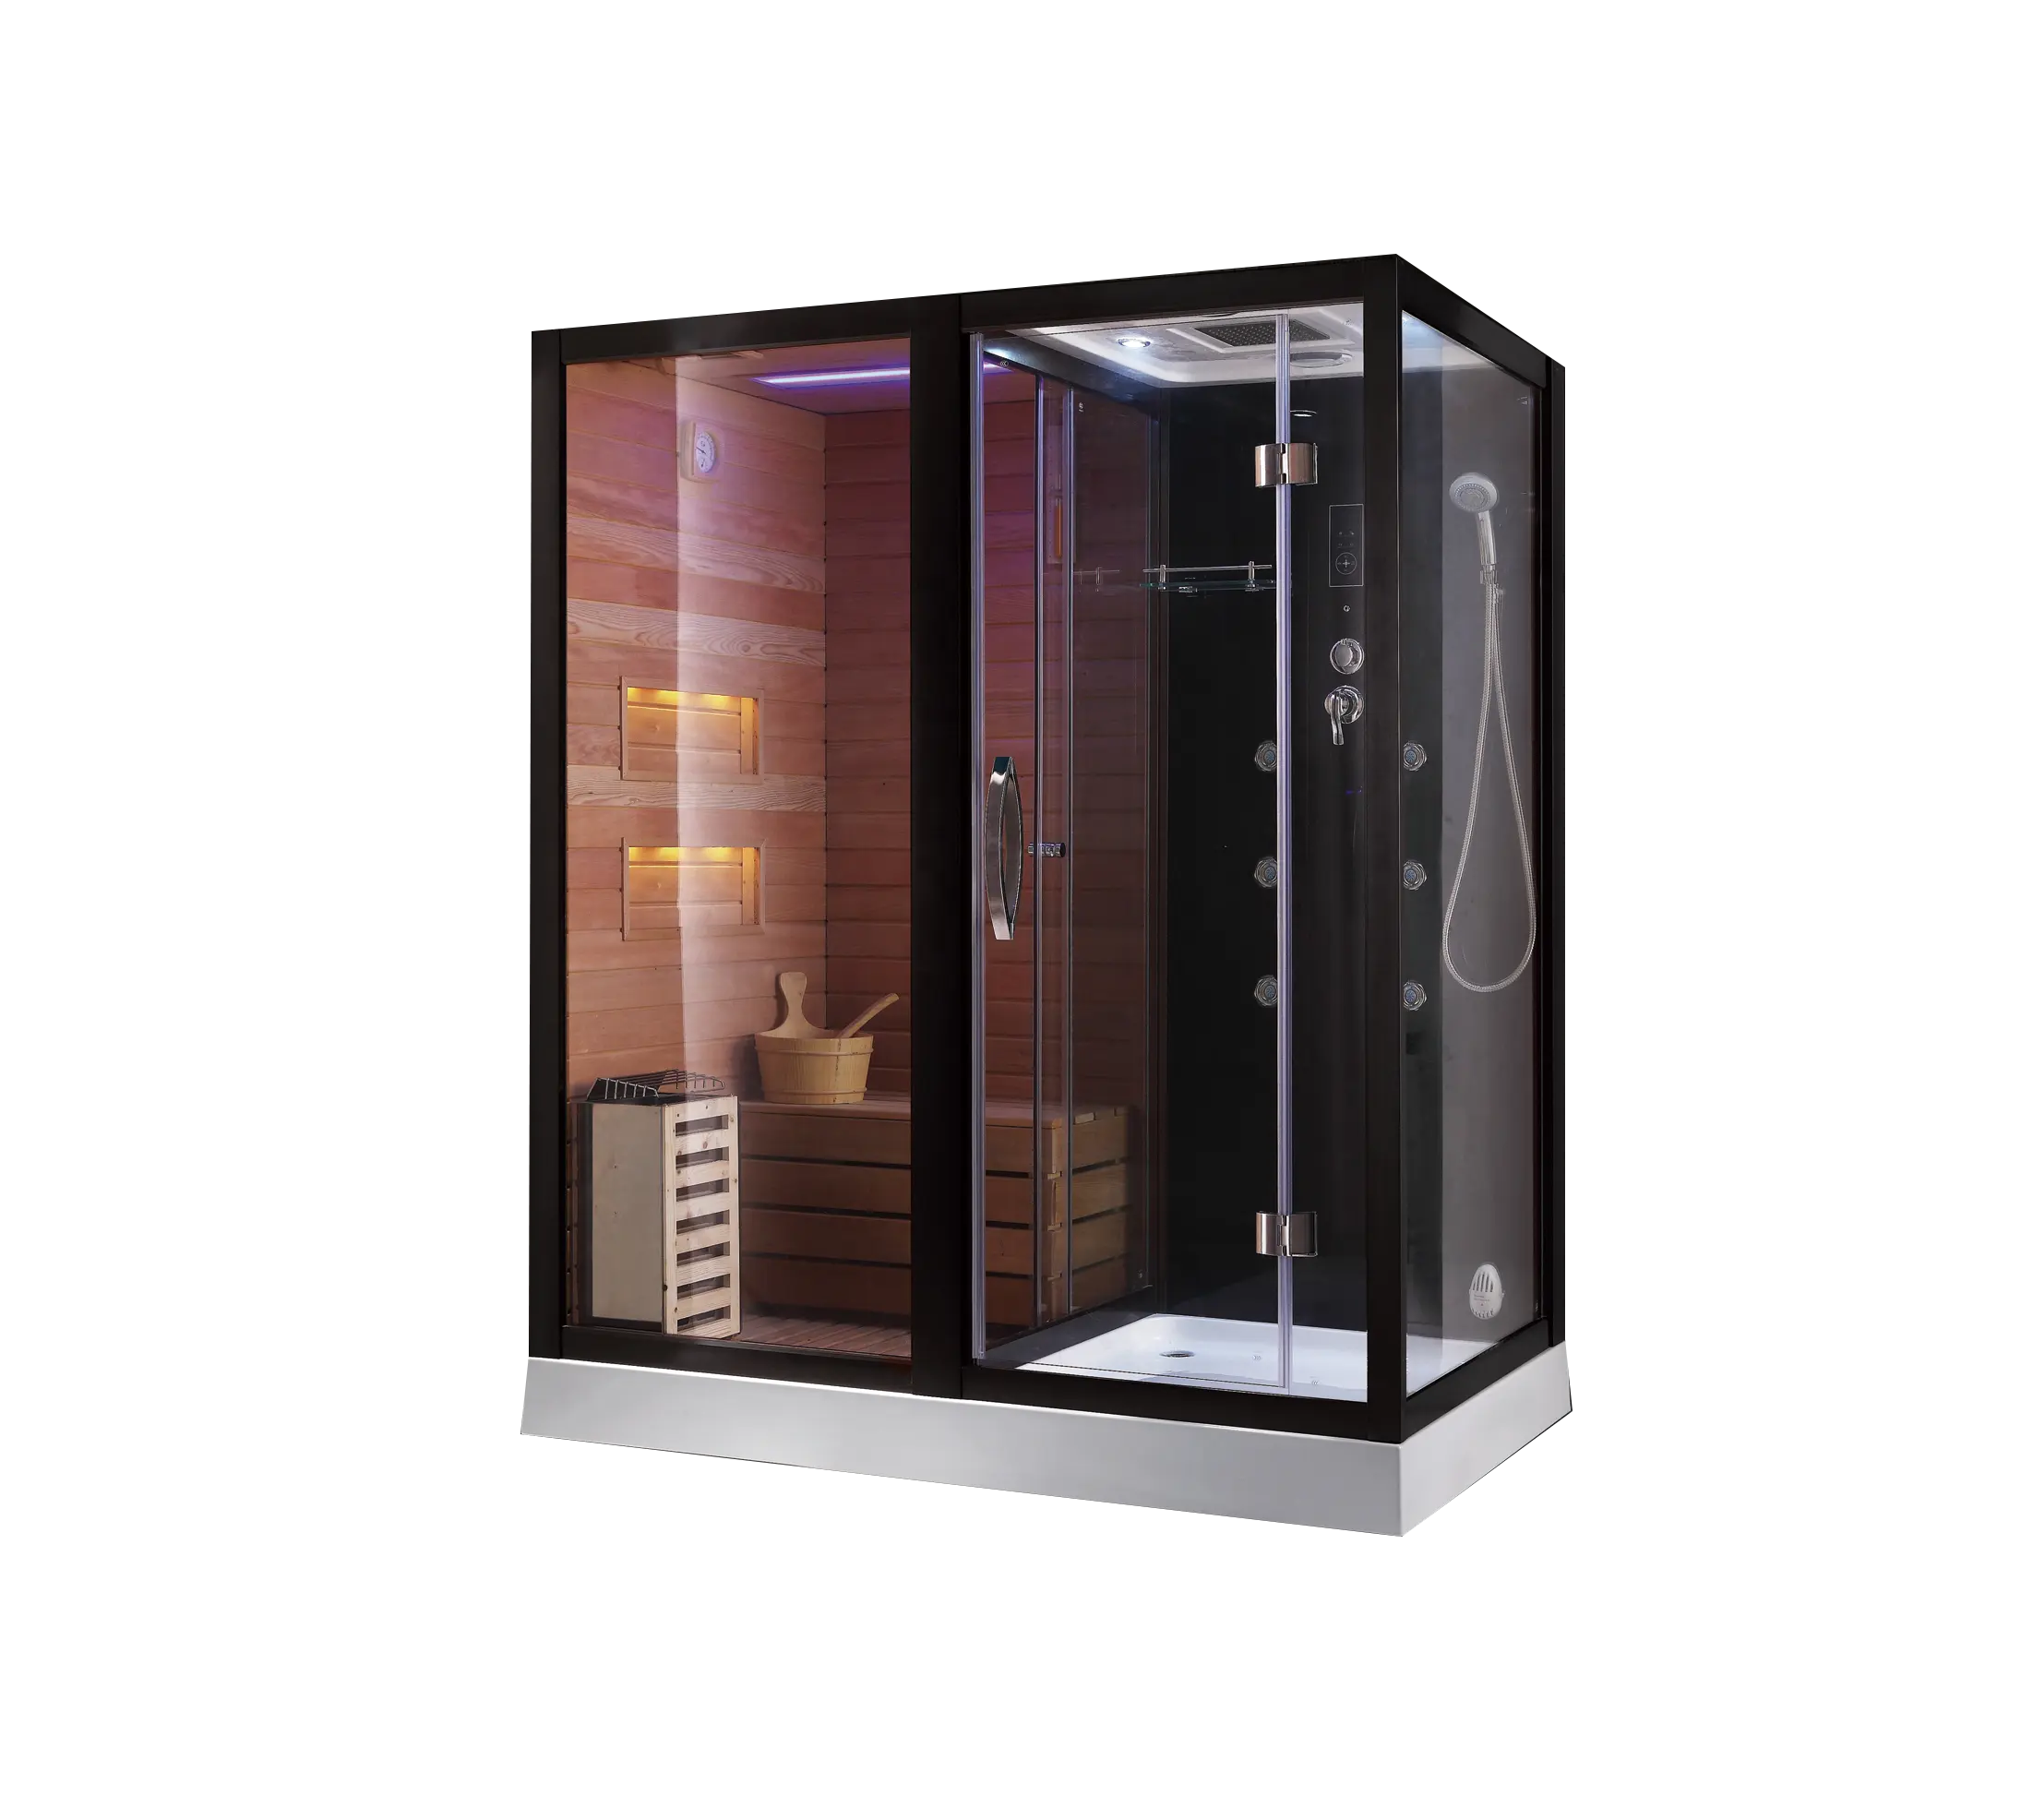 Luxury Indoor Traditional Home Sauna Dry And Wet Steam Shower Room Combined Unit